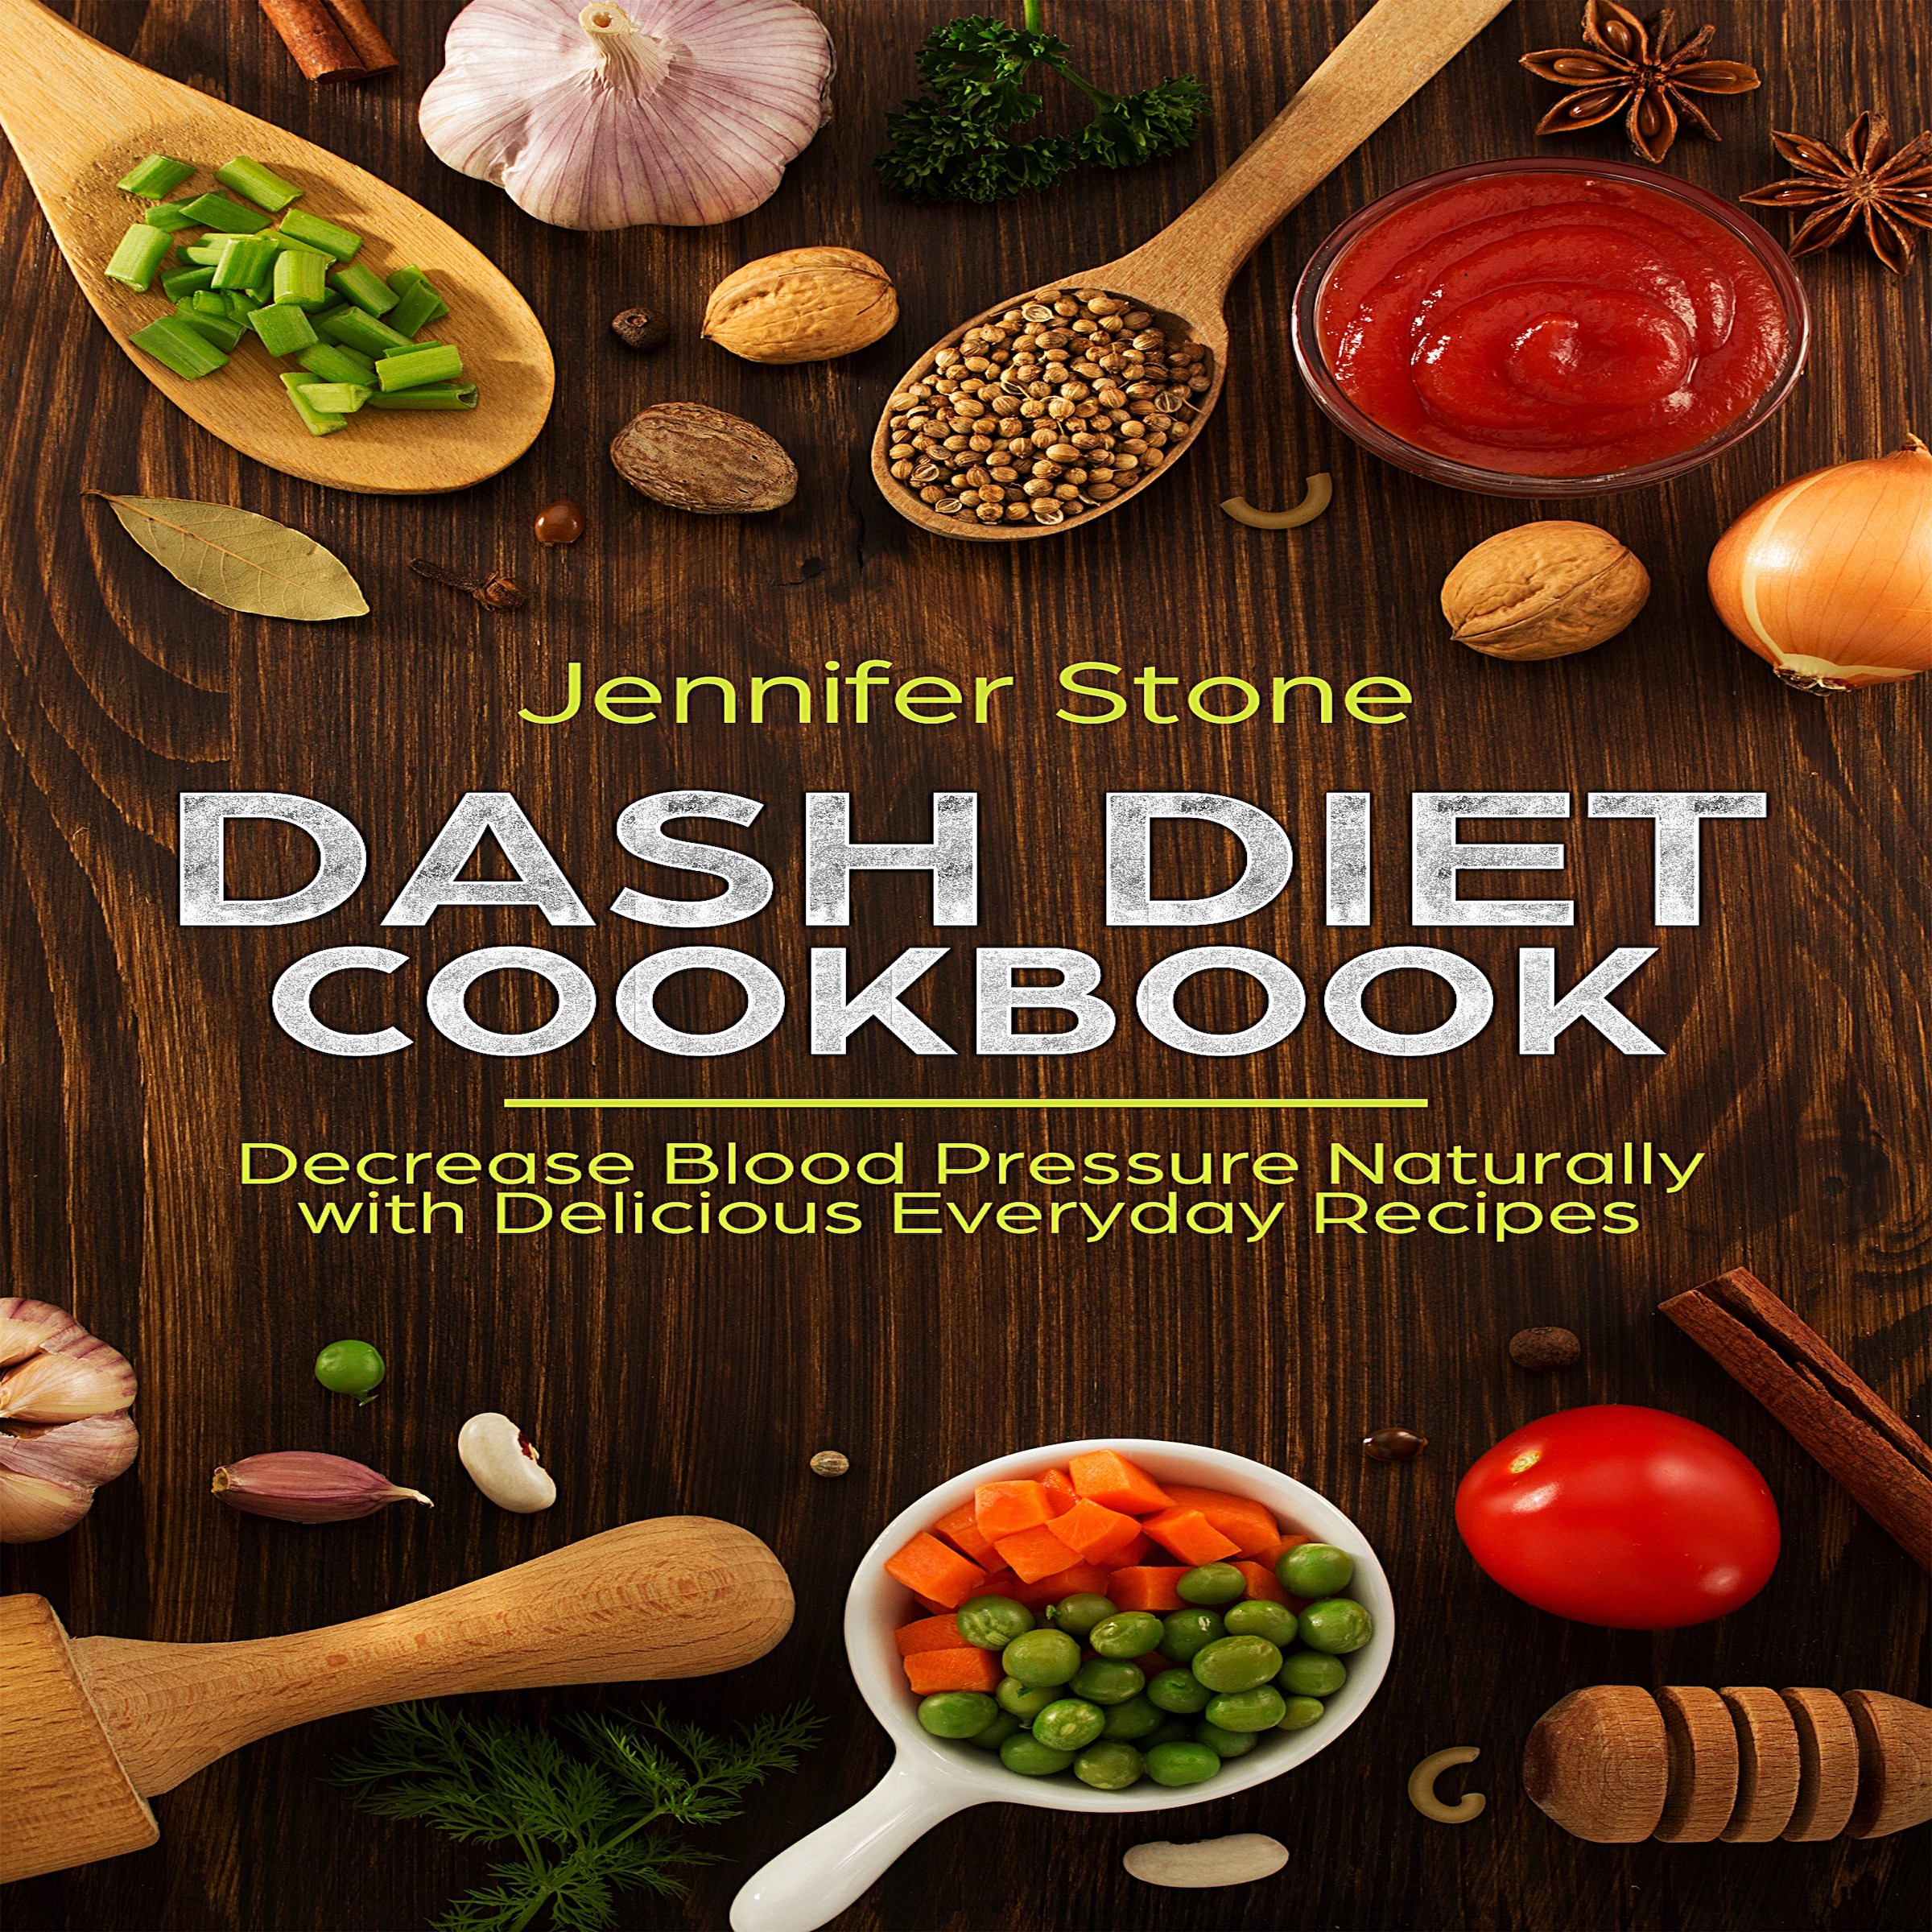 DASH Diet Cookbook: Decrease Blood Pressure Naturally with Delicious Everyday Recipes Audiobook by Jennifer Stone